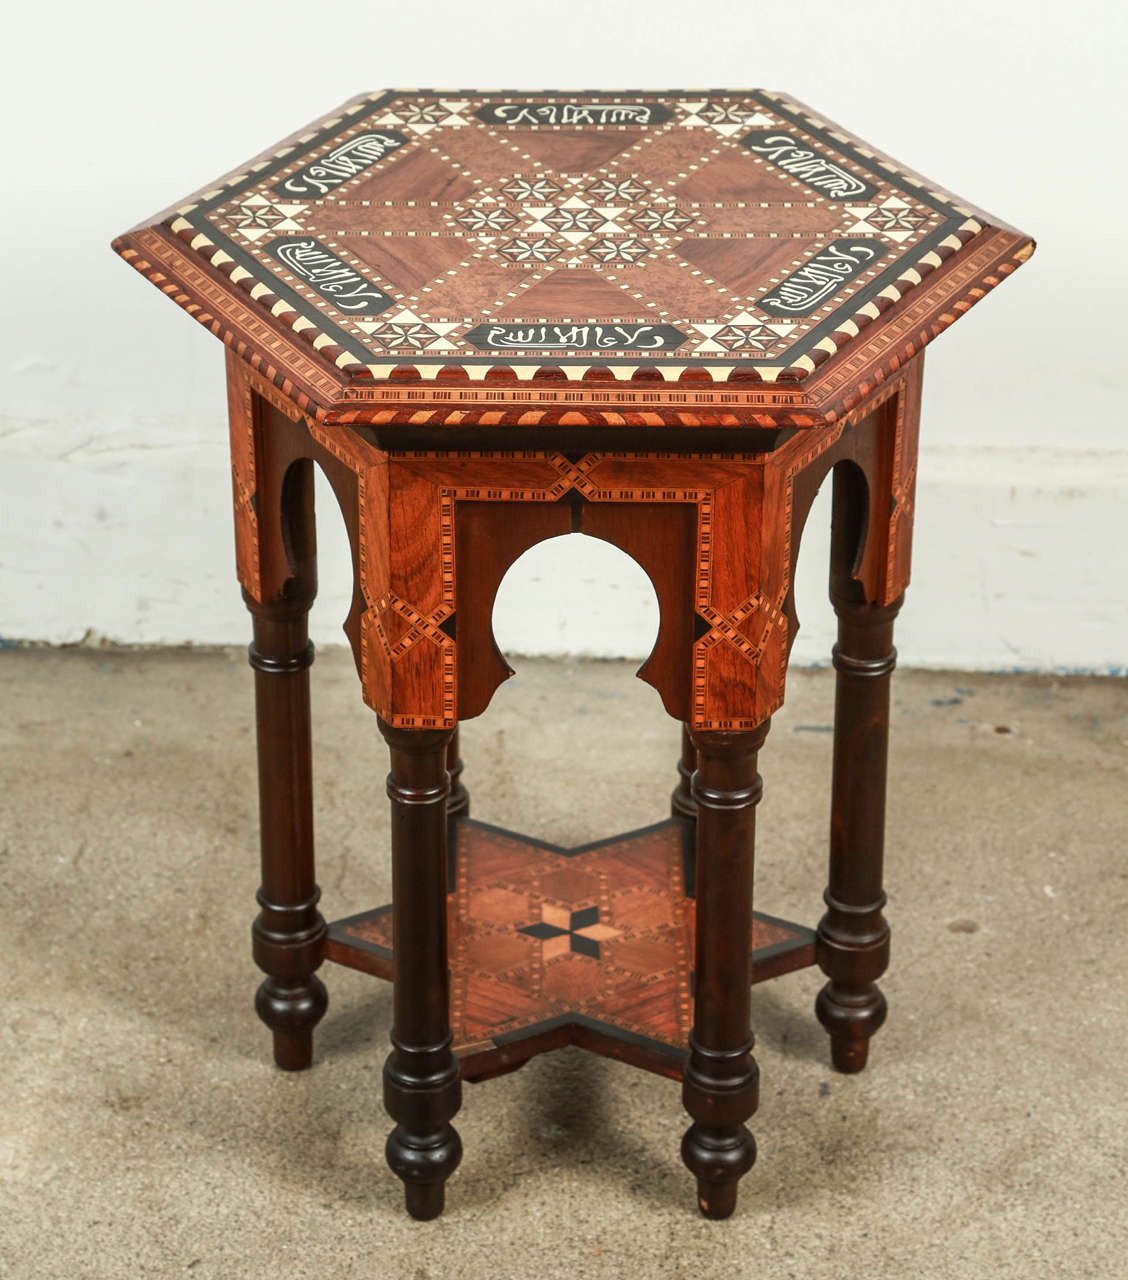 Hispano Moresque marquetry wood occasional side table. Custom order. Limited edition.
Hexagonal form with six turned legs and six pointed star shape at the bottom.
Bone inlaid, ebony, bone and mother-of-pearl and marquetry with geometric and floral